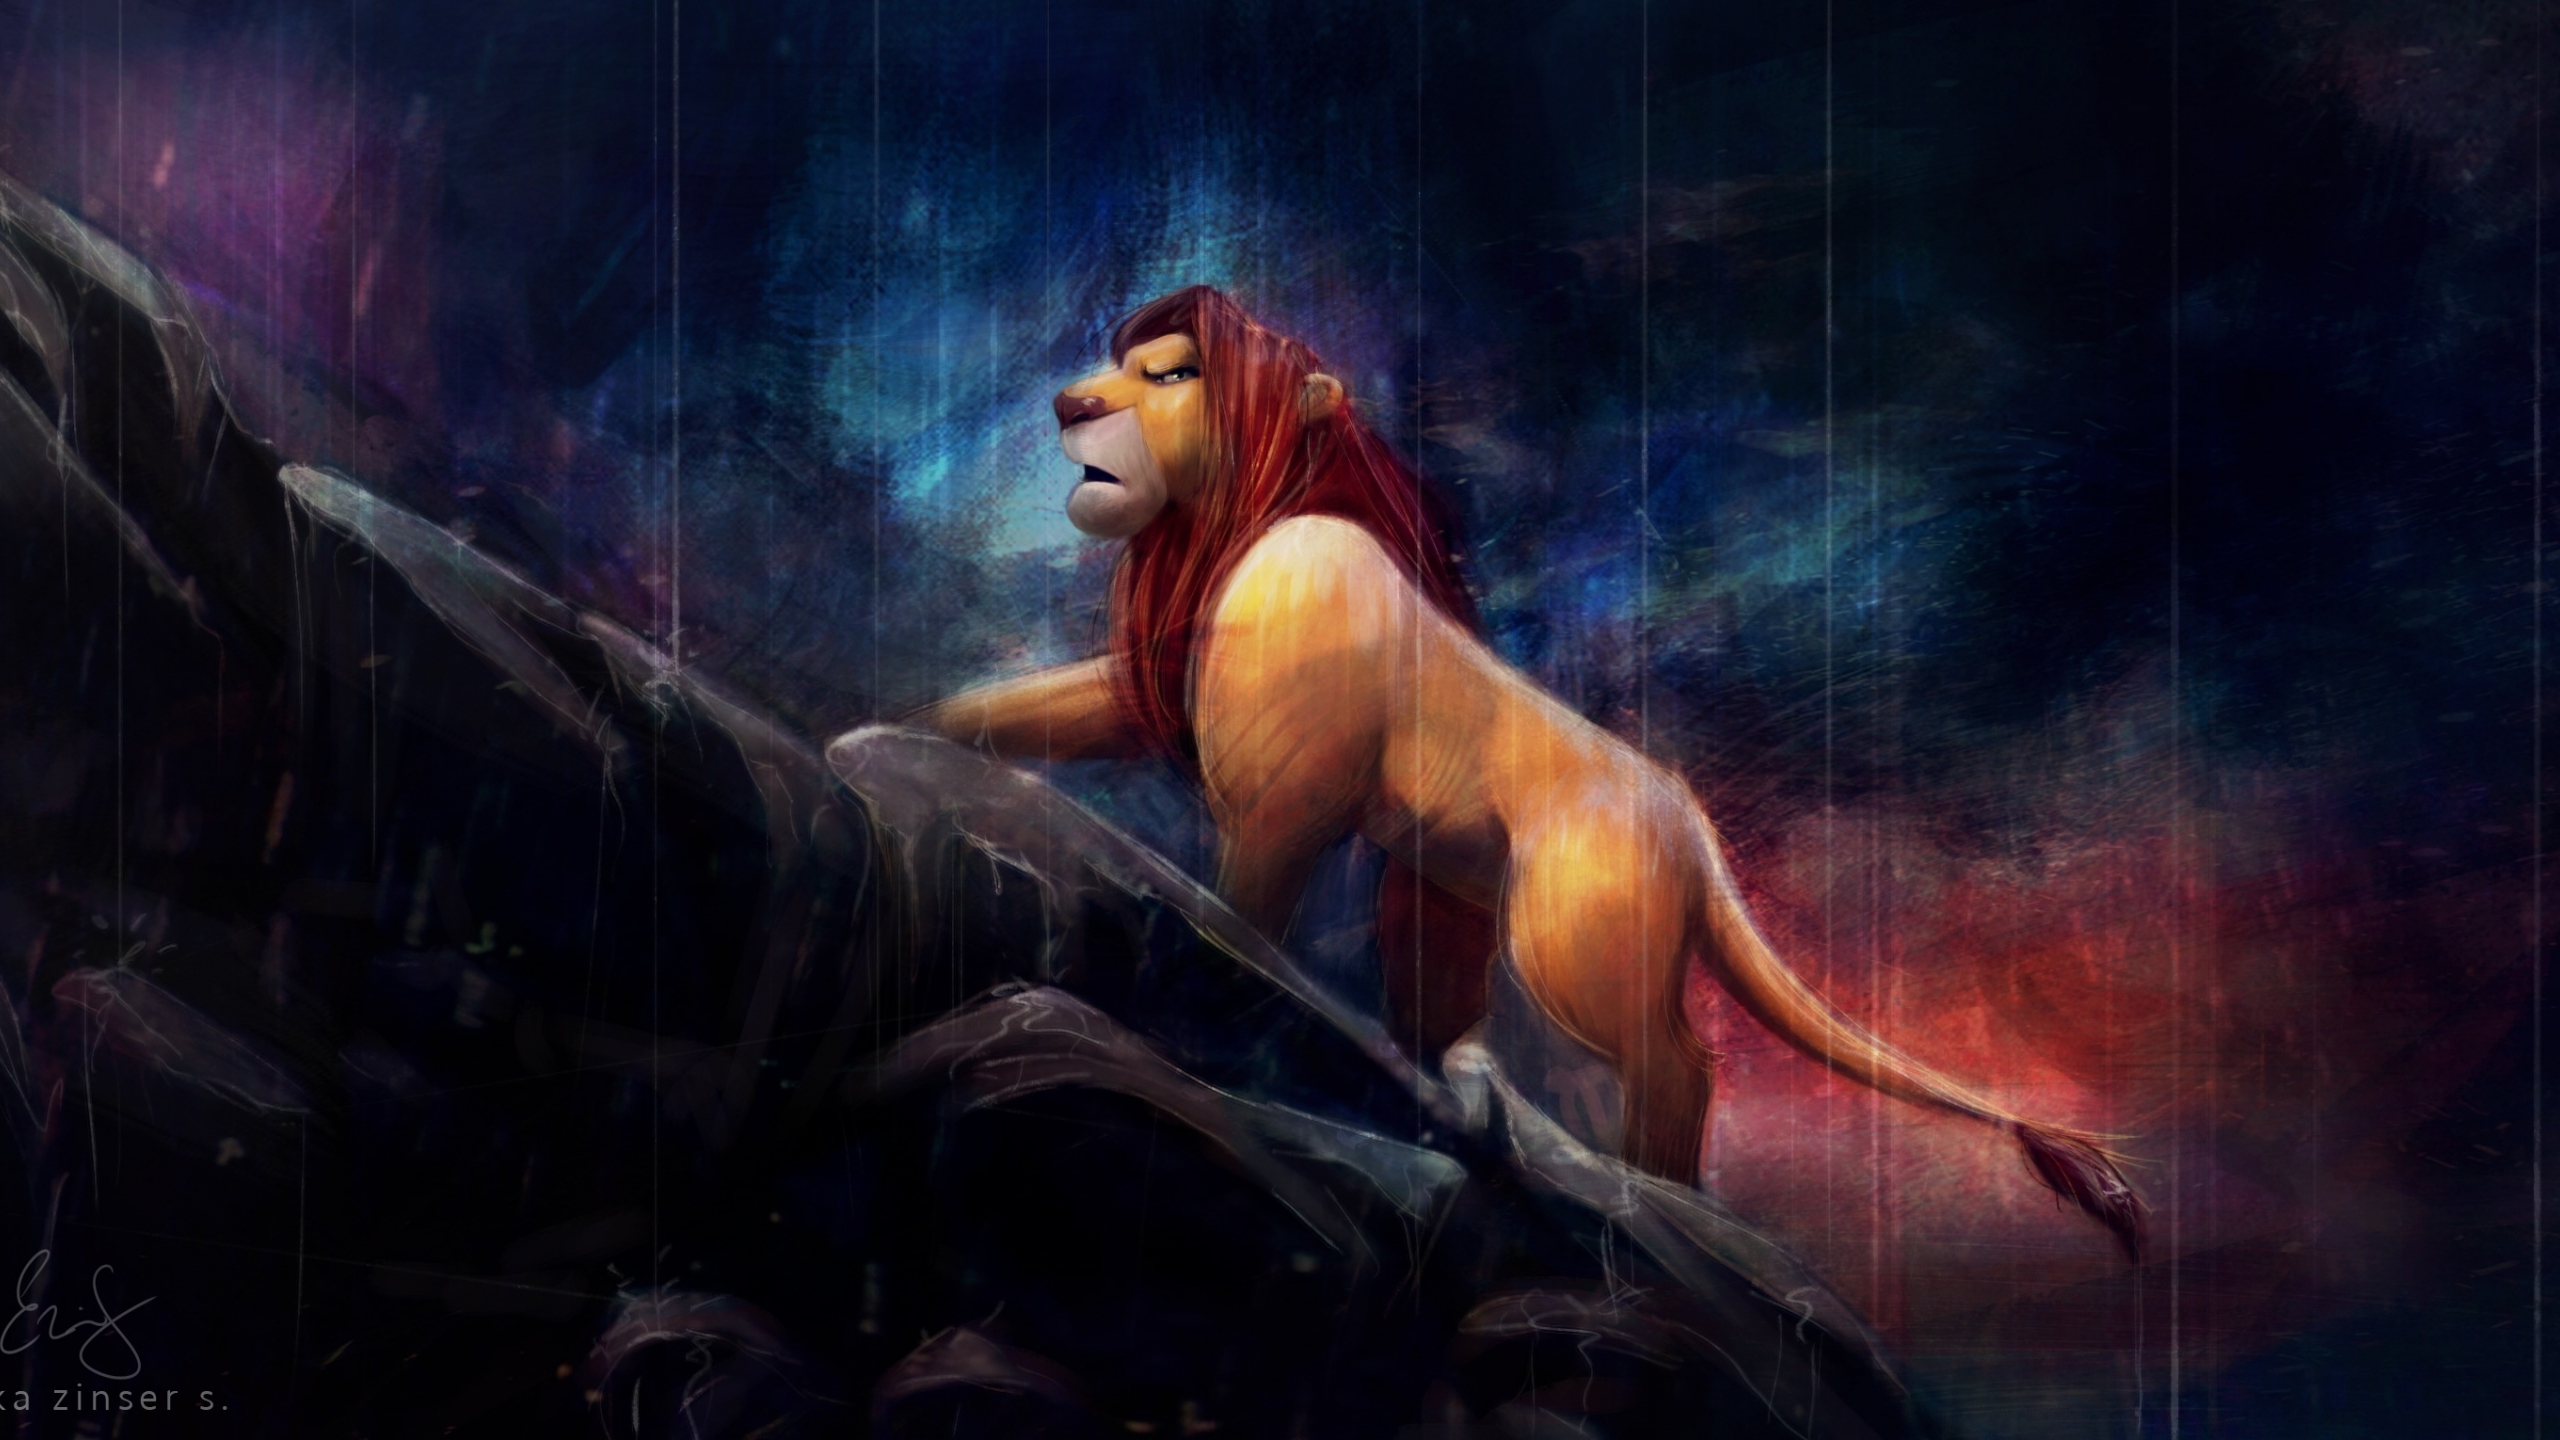 Download wallpaper 2560x1440 remember, who you are! lion king, art, dual  wide 16:9 2560x1440 hd background, 17469